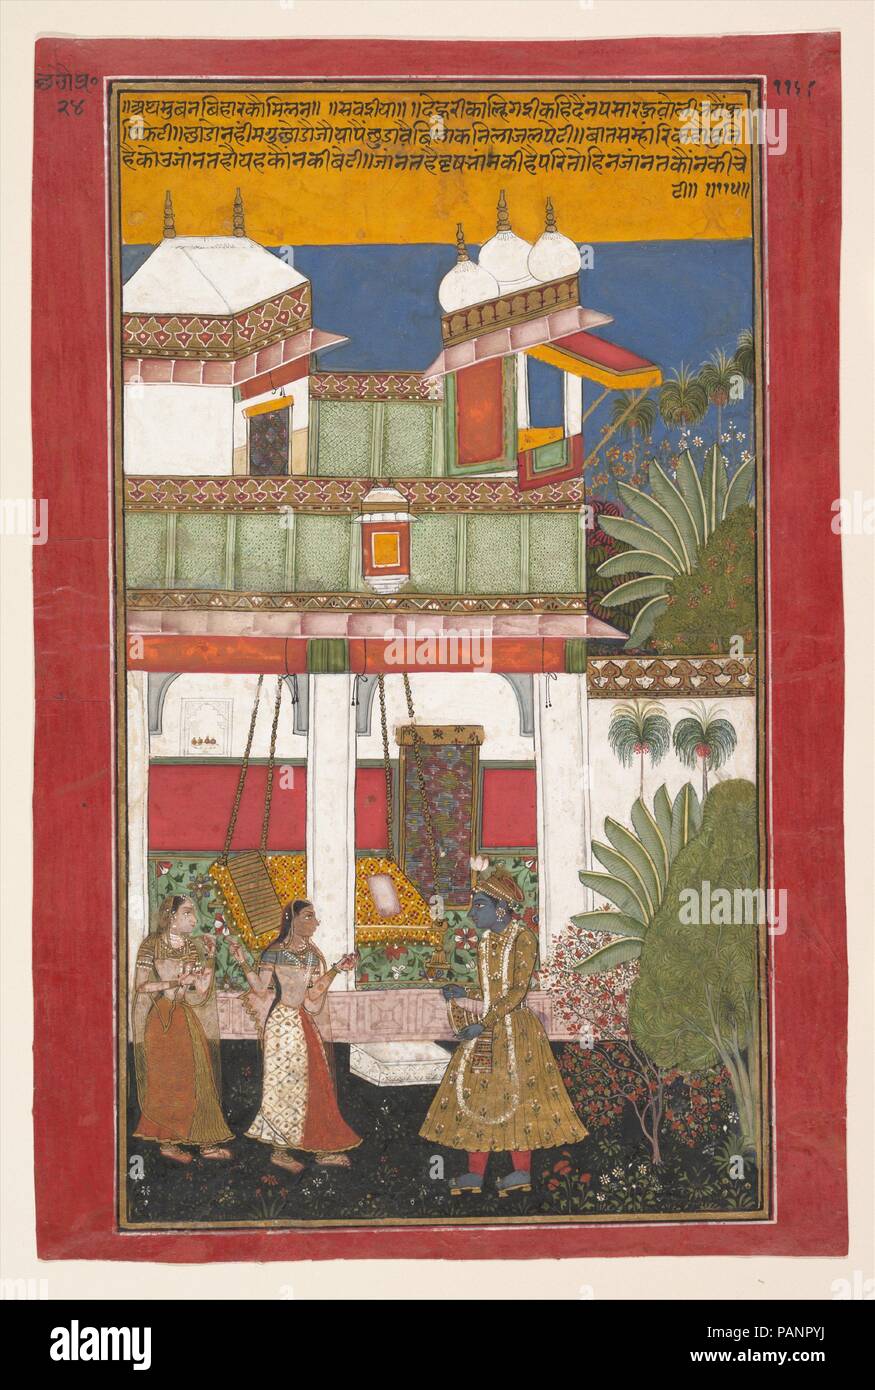 Krishna and Radha, Page from a Dispersed Rasikapriya (Verses Celebrating Aspects of Love). Culture: India (Rajasthan, Bundi). Dimensions: Image: 12 3/8 in. × 7 in. (31.4 × 17.8 cm)  Mat: 13 1/2 × 8 7/8 in. (34.3 × 22.5 cm). Date: ca. 1660-70.  Krishna approaches Radha and a go-between who has facilitated their meeting. The open pavilion and empty bed, allusions to a possible passionate encounter, are a recurrent theme within paintings illustrating the devotional poetry of the Rasikapriya. Bundi workshops developed a refined jewel-like painting style featuring patterned architecture and a verda Stock Photo